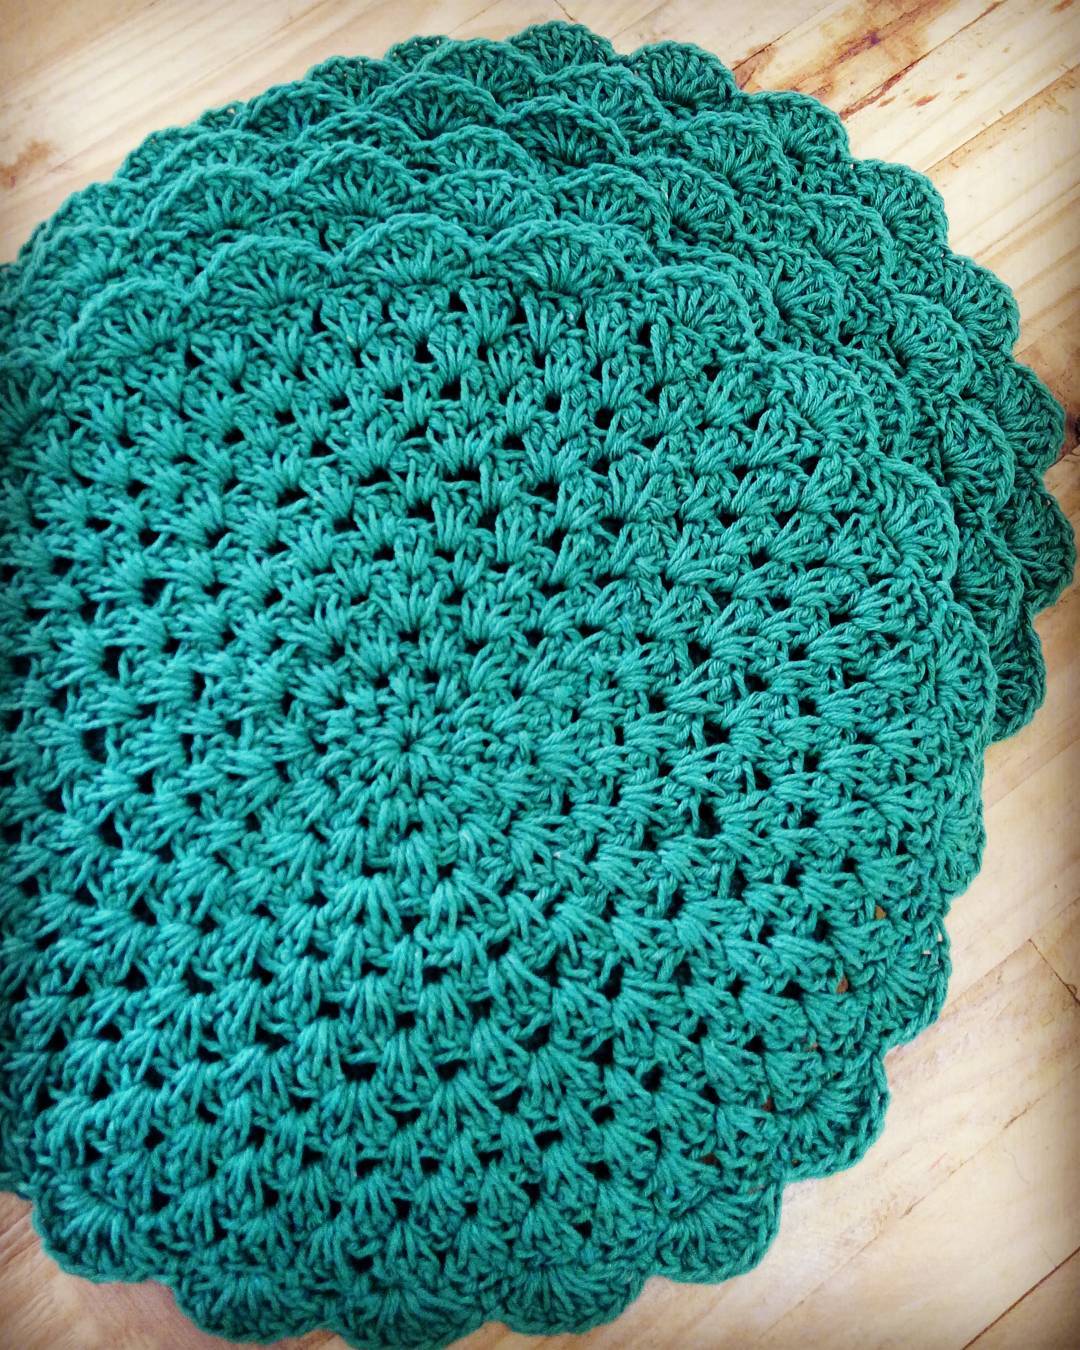 Green crochet sousplat to complement your decor.